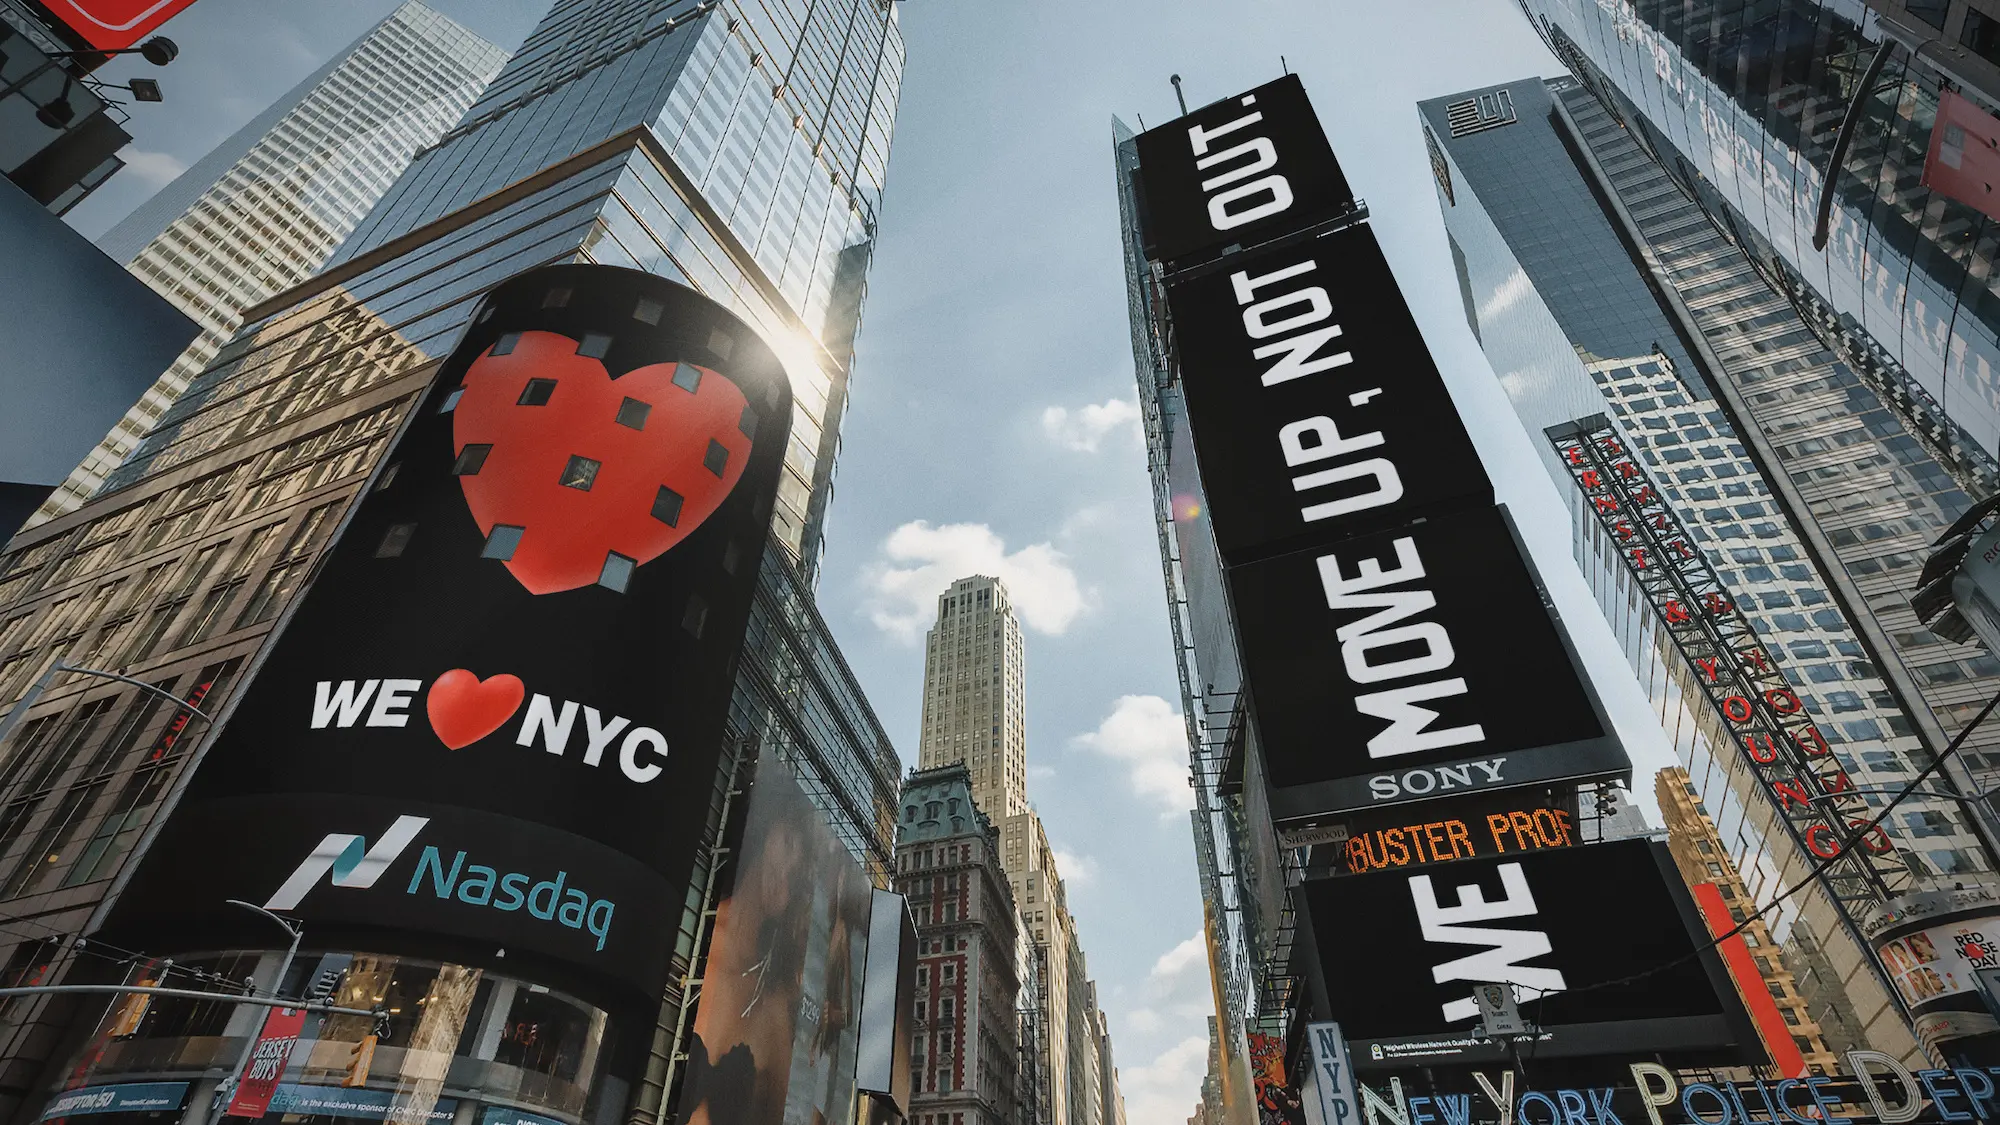 Officials launch We ♥ NYC campaign to help promote 'greatest city